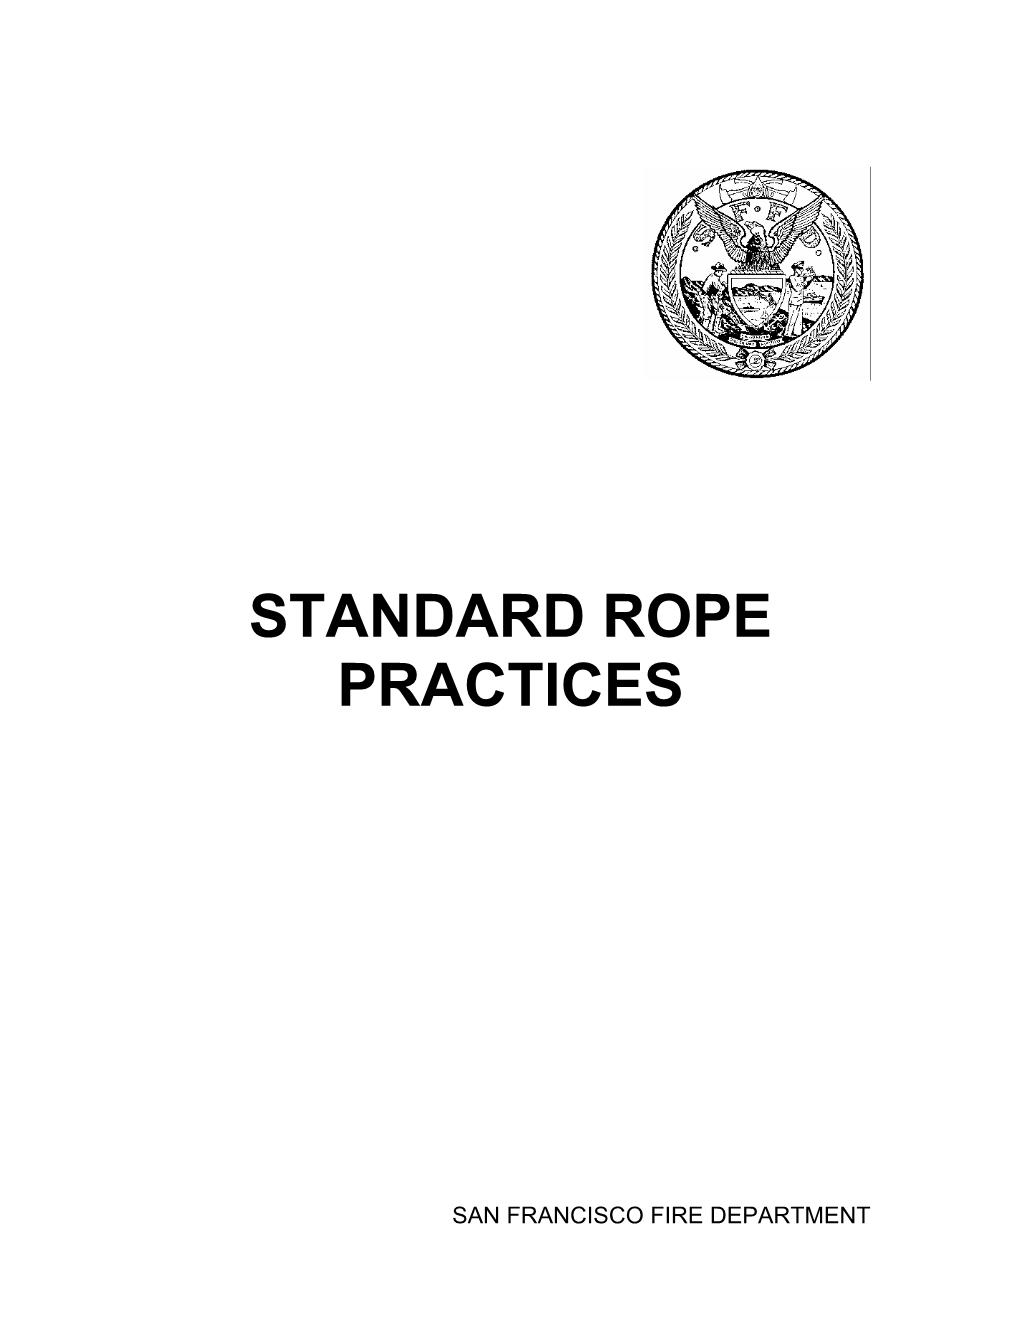 Standard Rope Practices